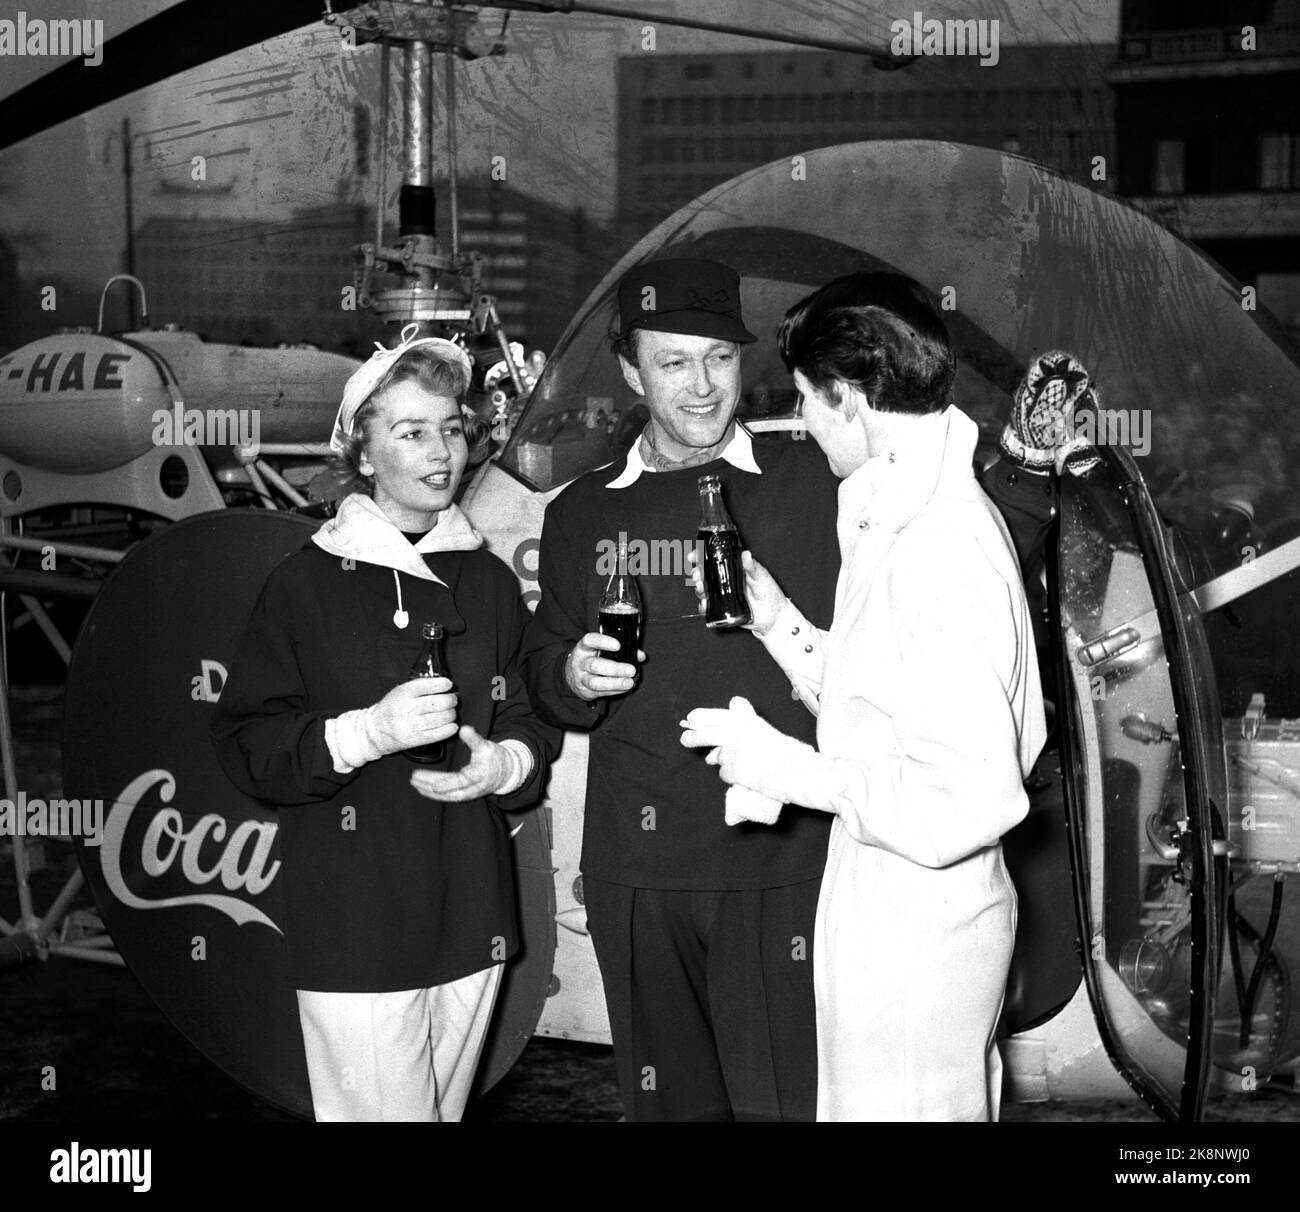 Oslo Winter Olympics 1952. During the Olympics, Coca Cola had a big advertising campaign. In the picture we see a helicopter with Coca Cola advertising that has landed in front of the town hall. Here people enjoy drinking Coca Cola straight from the bottle. Stock Photo